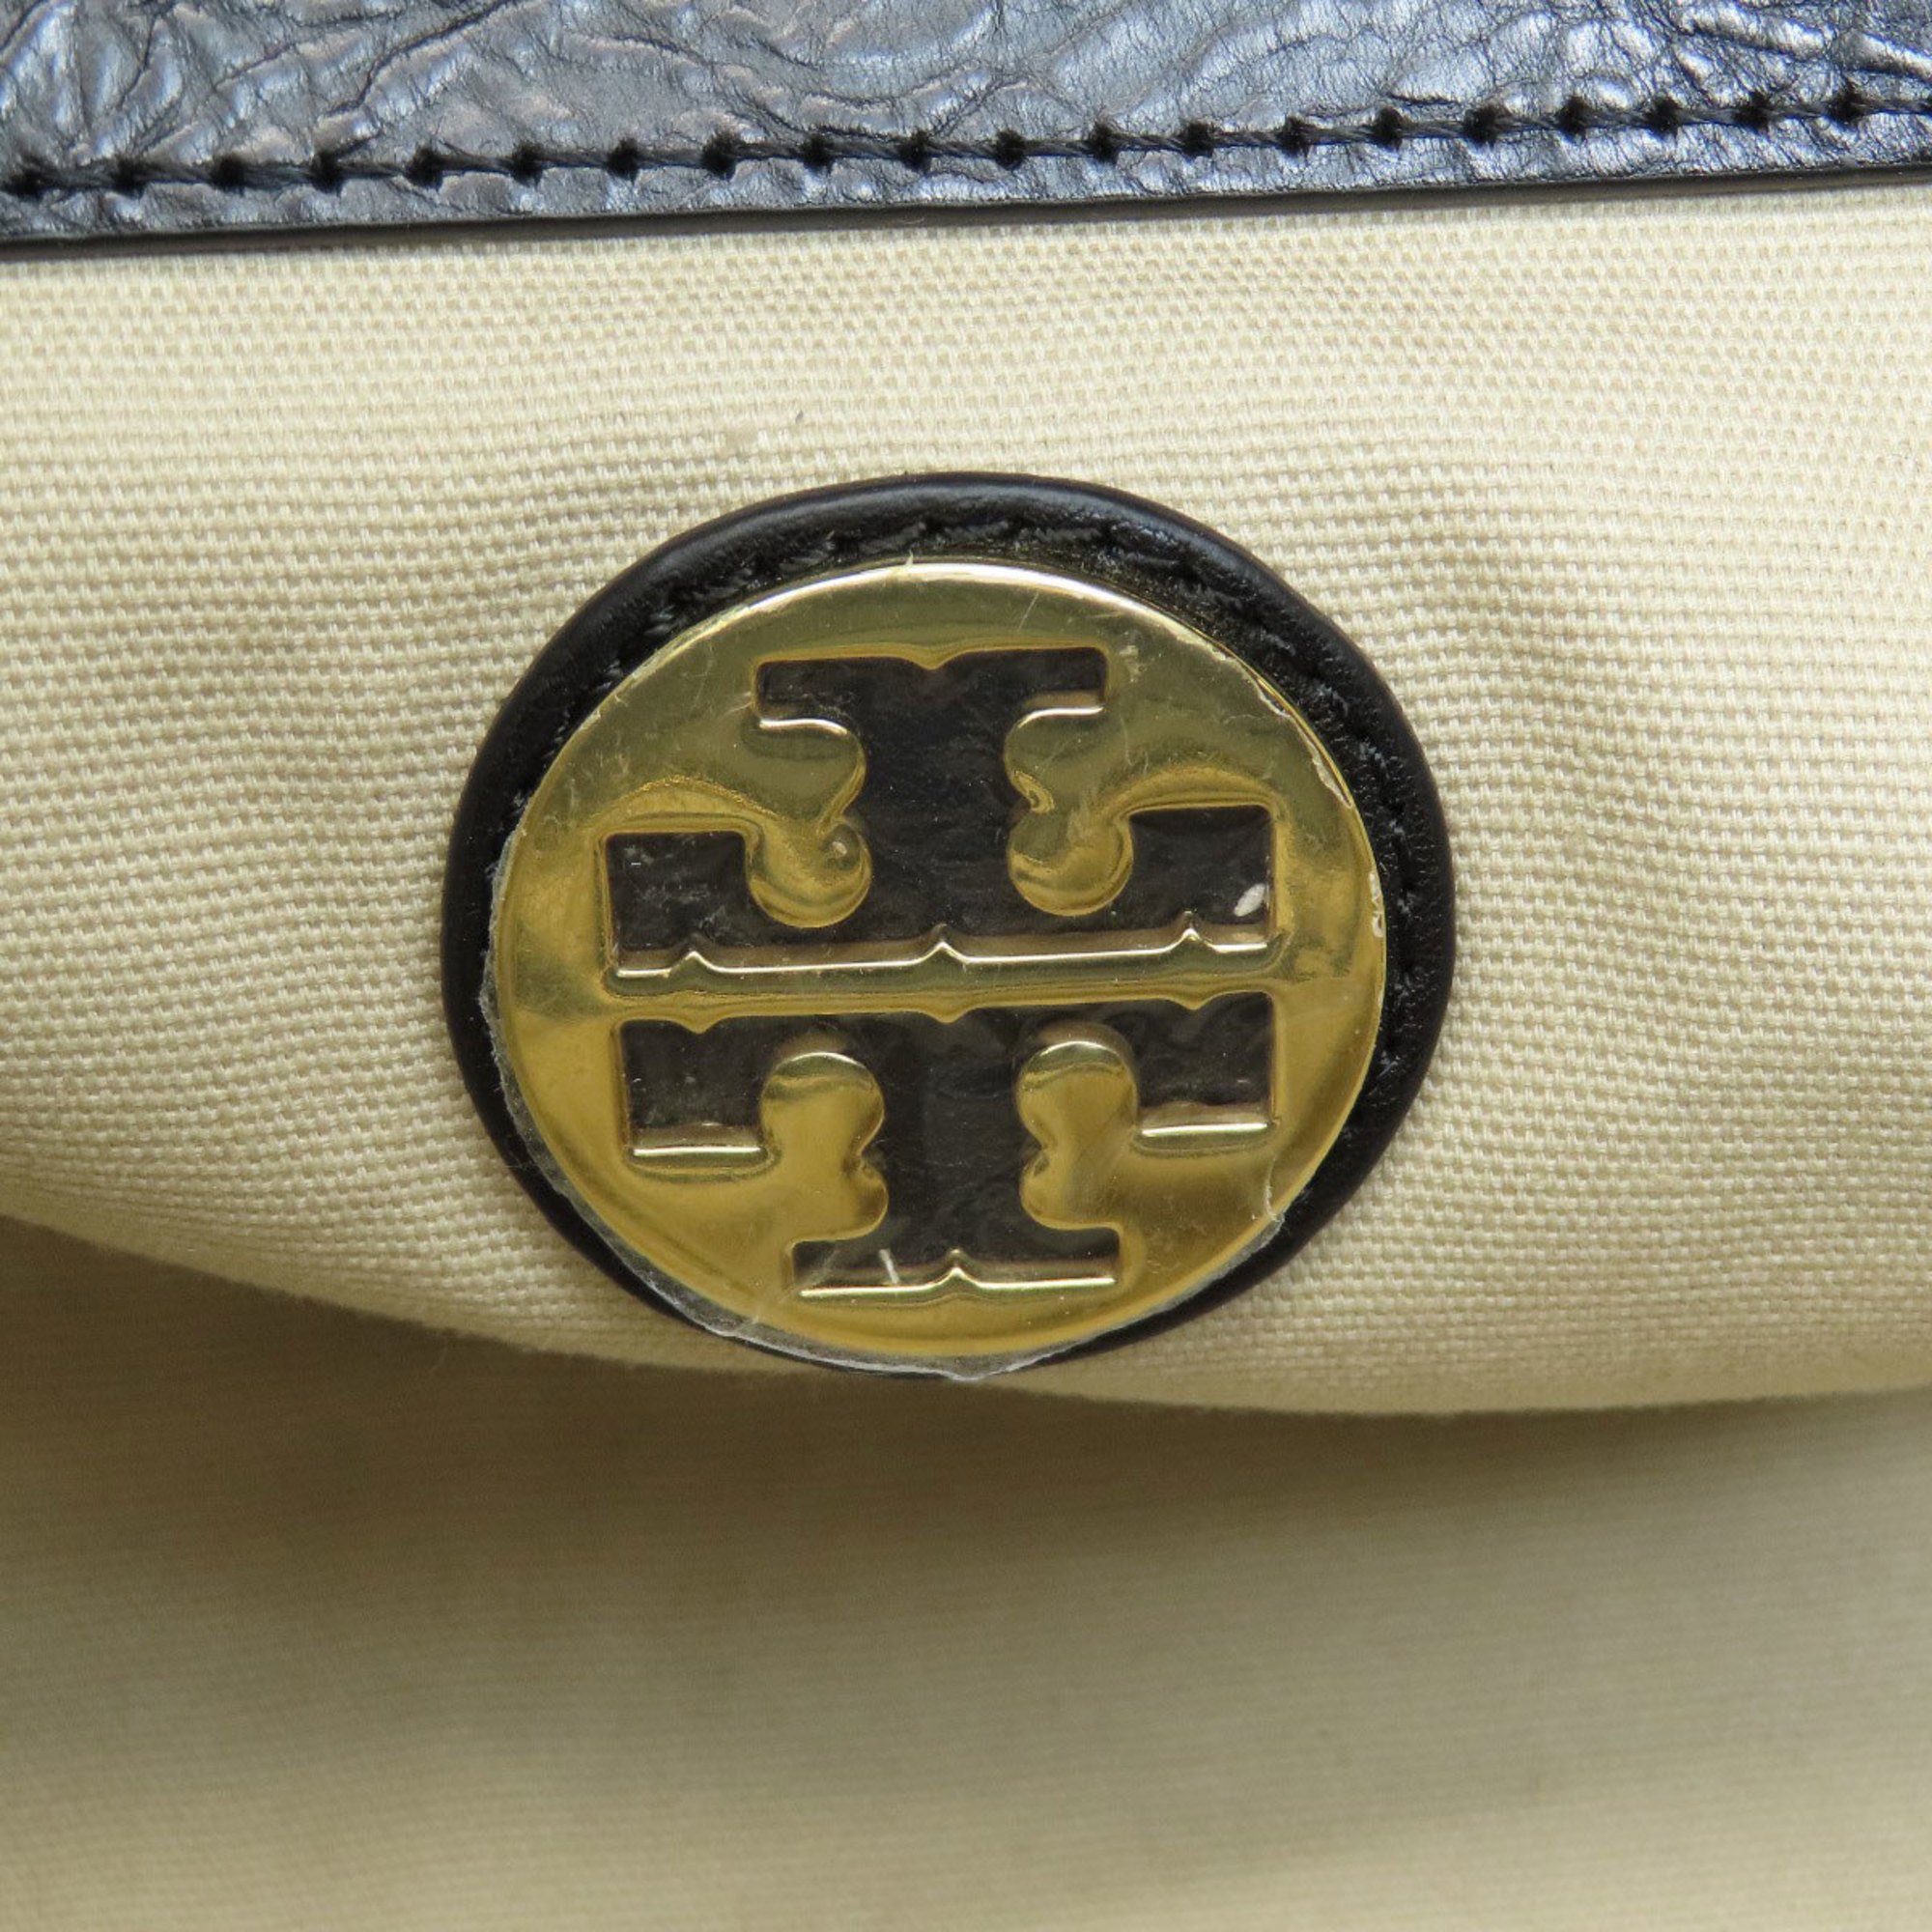 Tory Burch Leather Tote Bag for Women